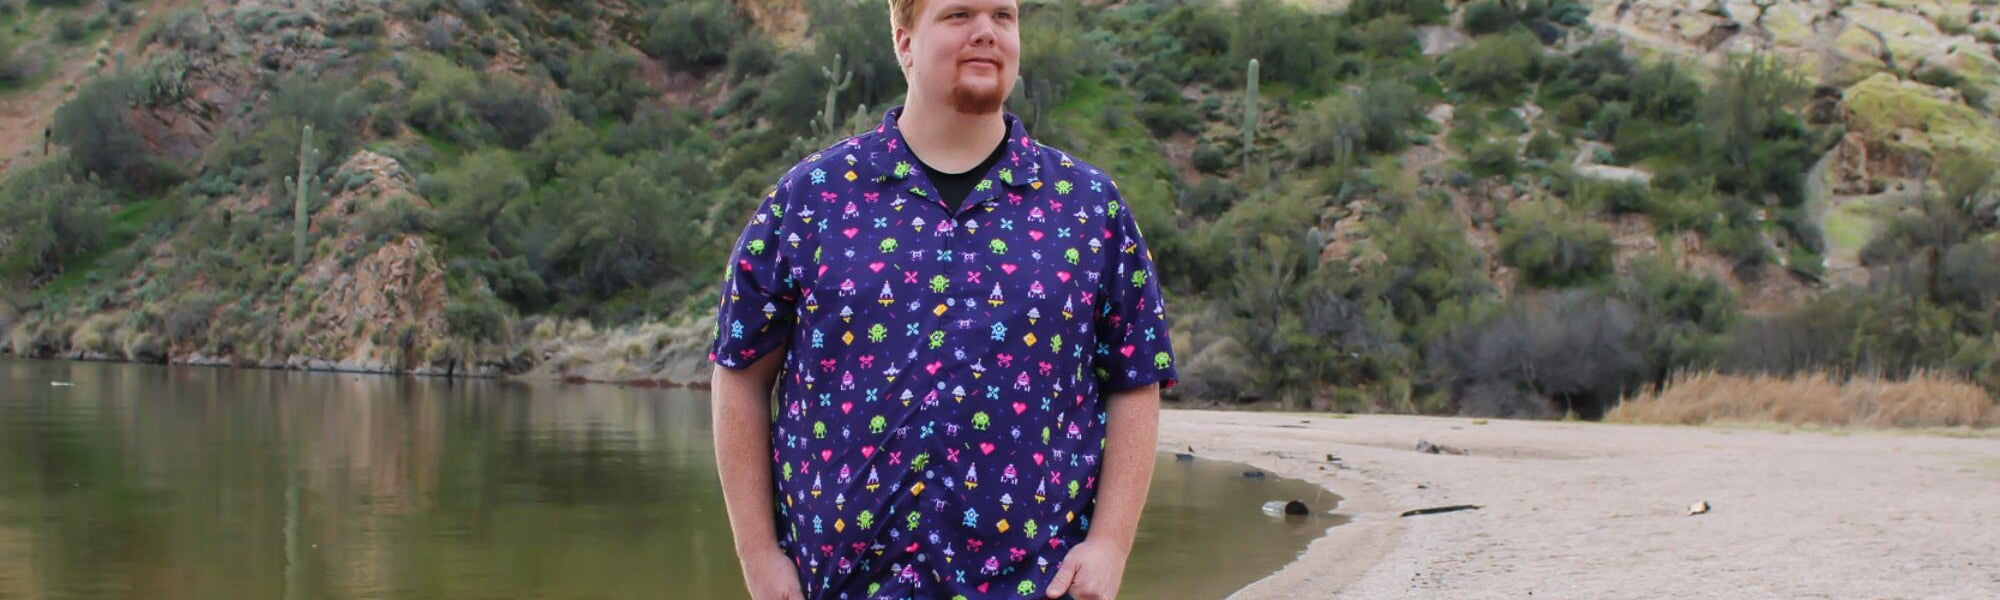 man standing on a sandy desert beach, wearing a vibrant purple shirt with classic video game arcade graphics printed all over it. The shirt features iconic video game characters and graphics in bright and bold colors